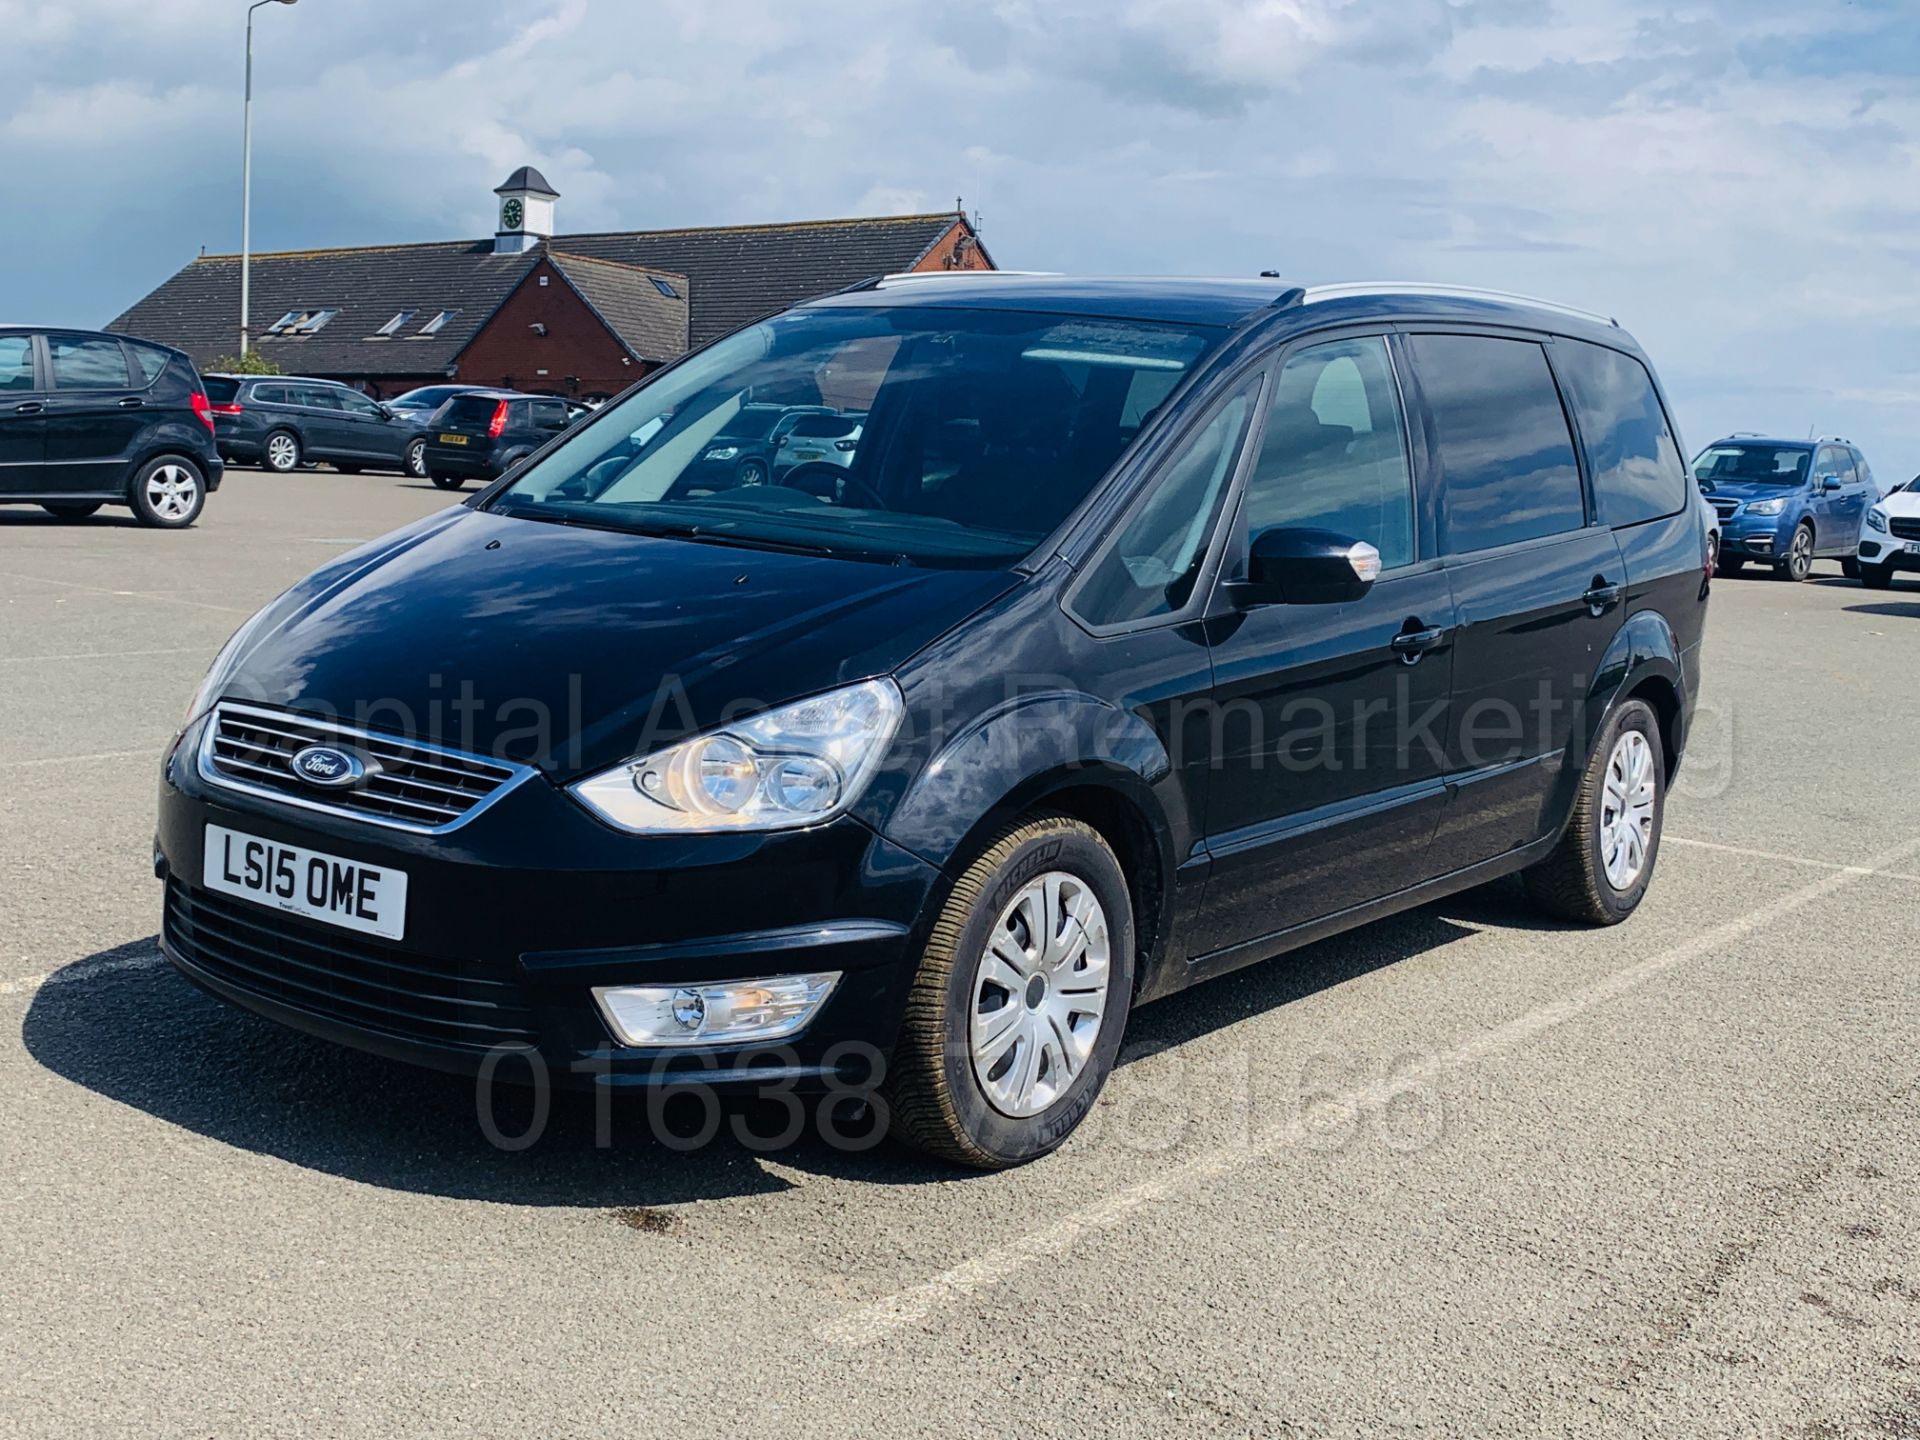 FORD GALAXY *ZETEC* 7 SEATER MPV (2015) '2.0 TDCI - 140 BHP - POWER SHIFT' (1 OWNER) - Image 2 of 37